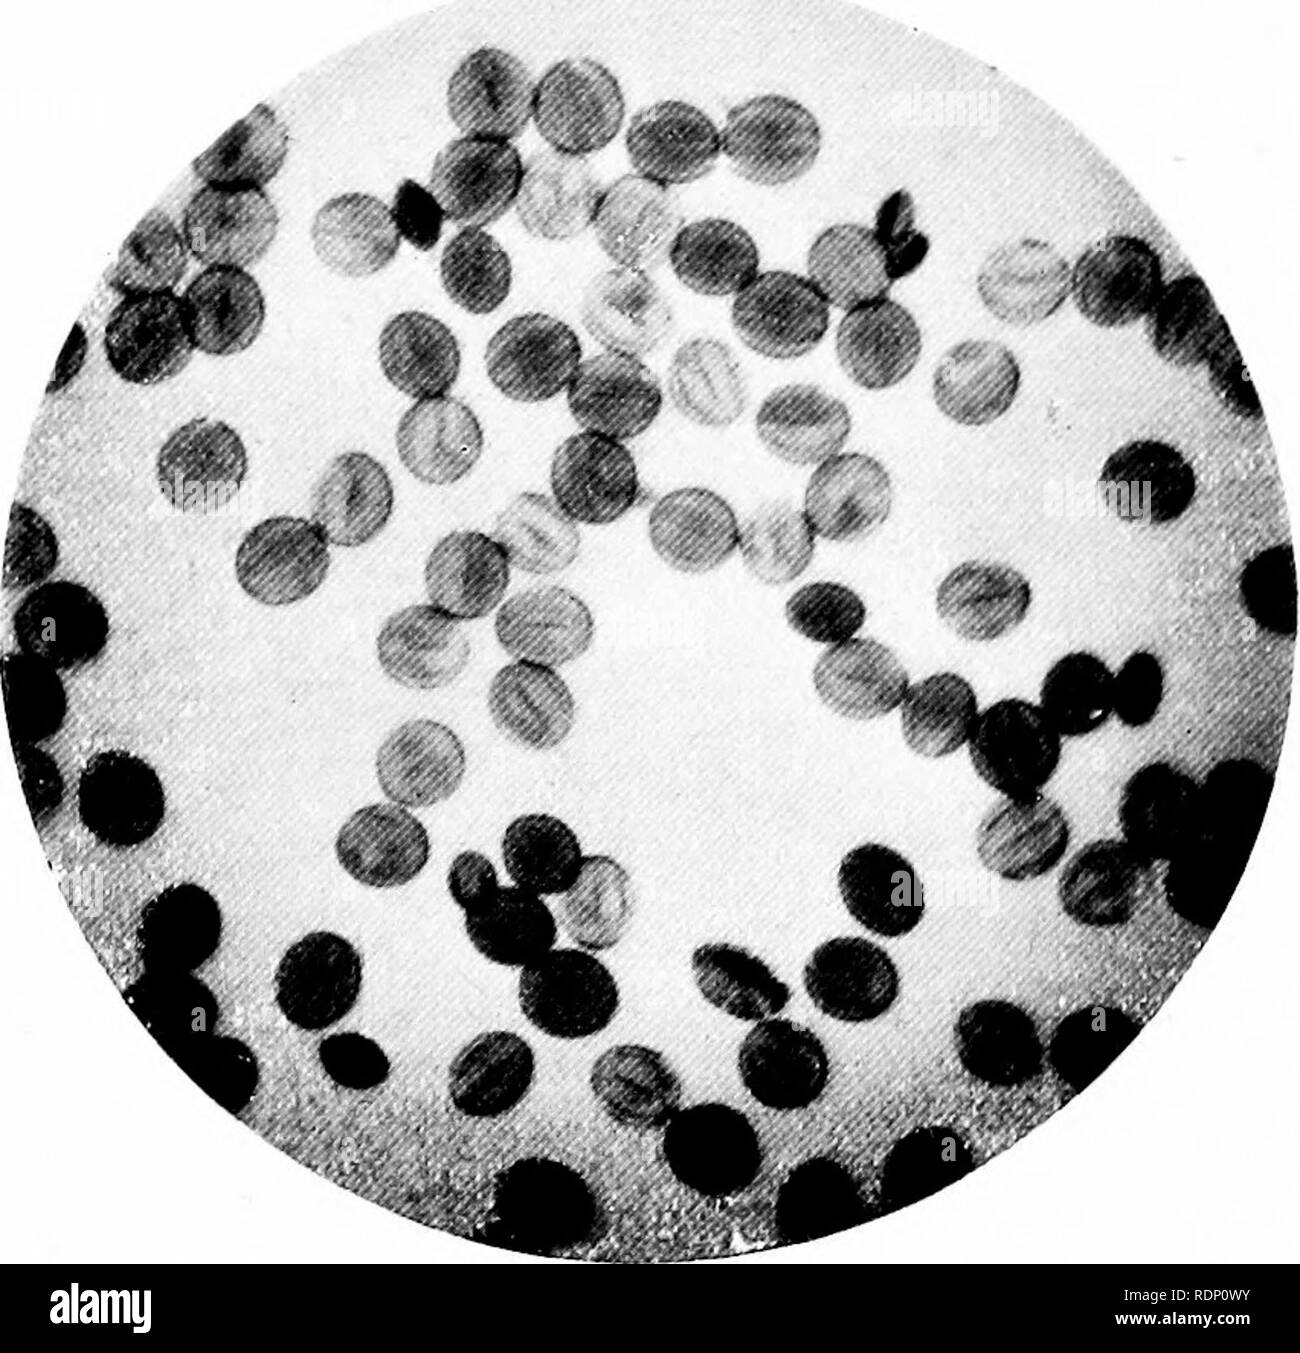 Pollen grains microscope Black and White Stock Photos & Images - Alamy